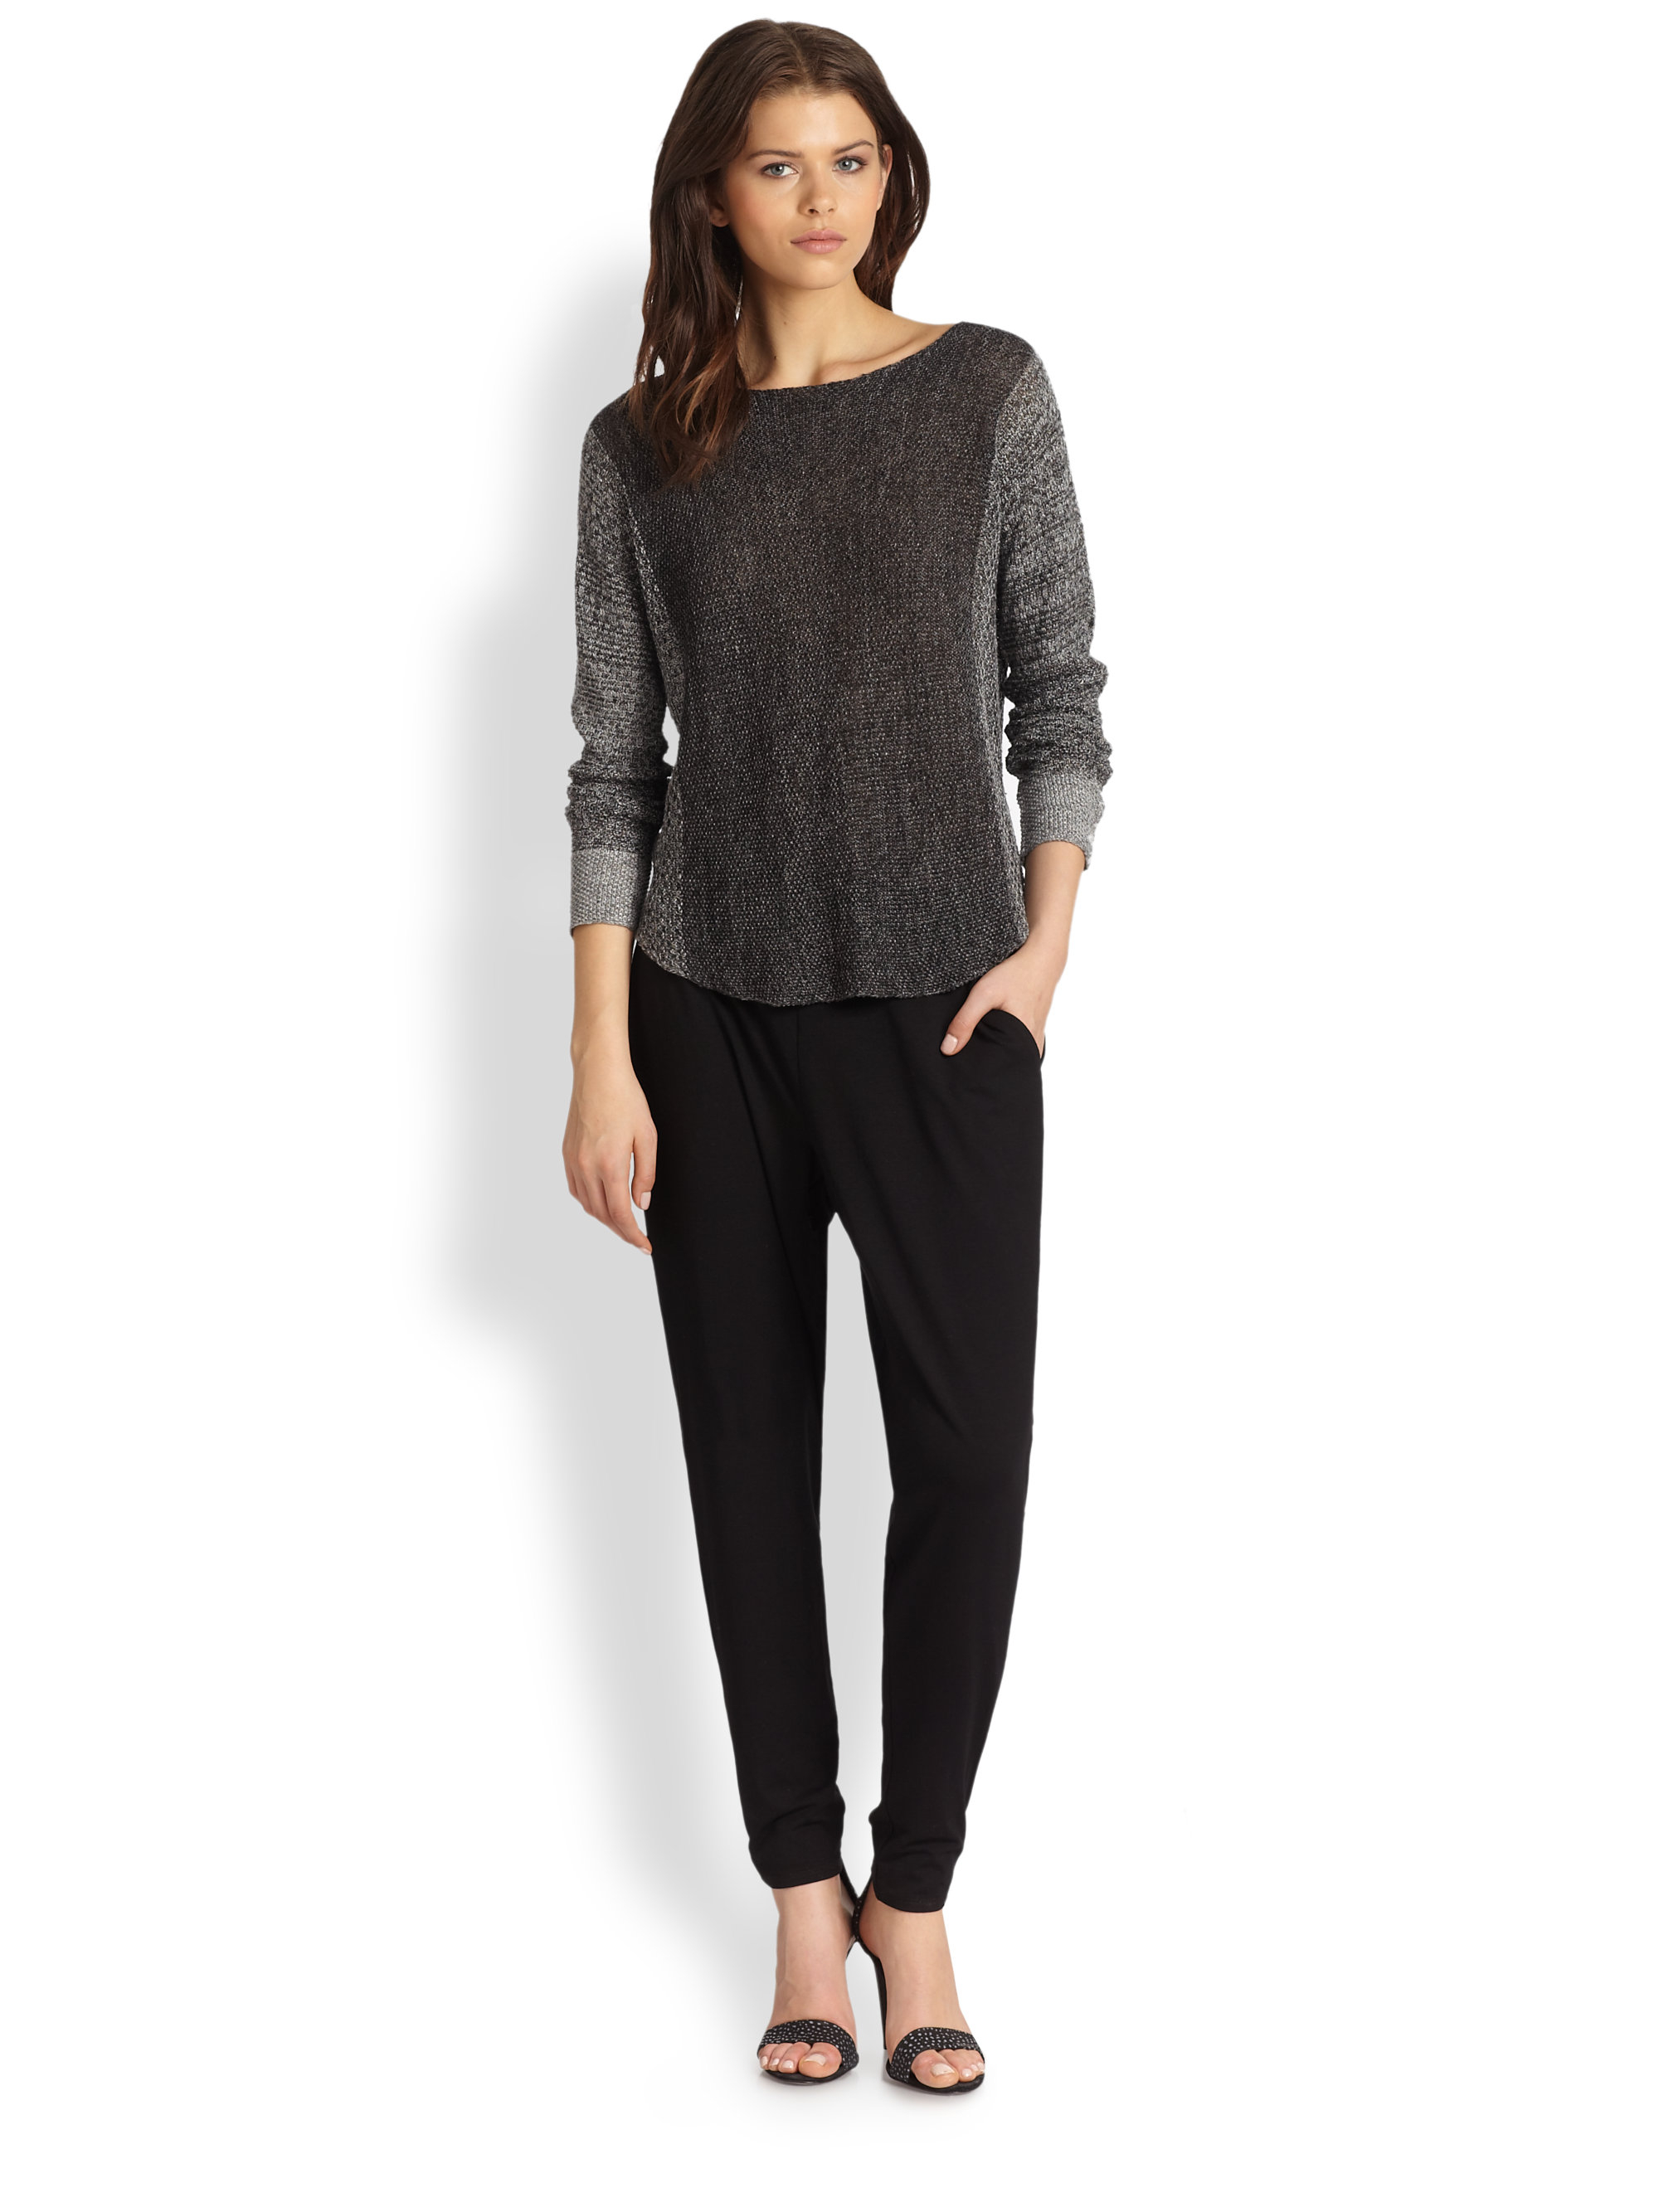 Lyst - Eileen Fisher Jersey Slouchy Tapered Pants in Black